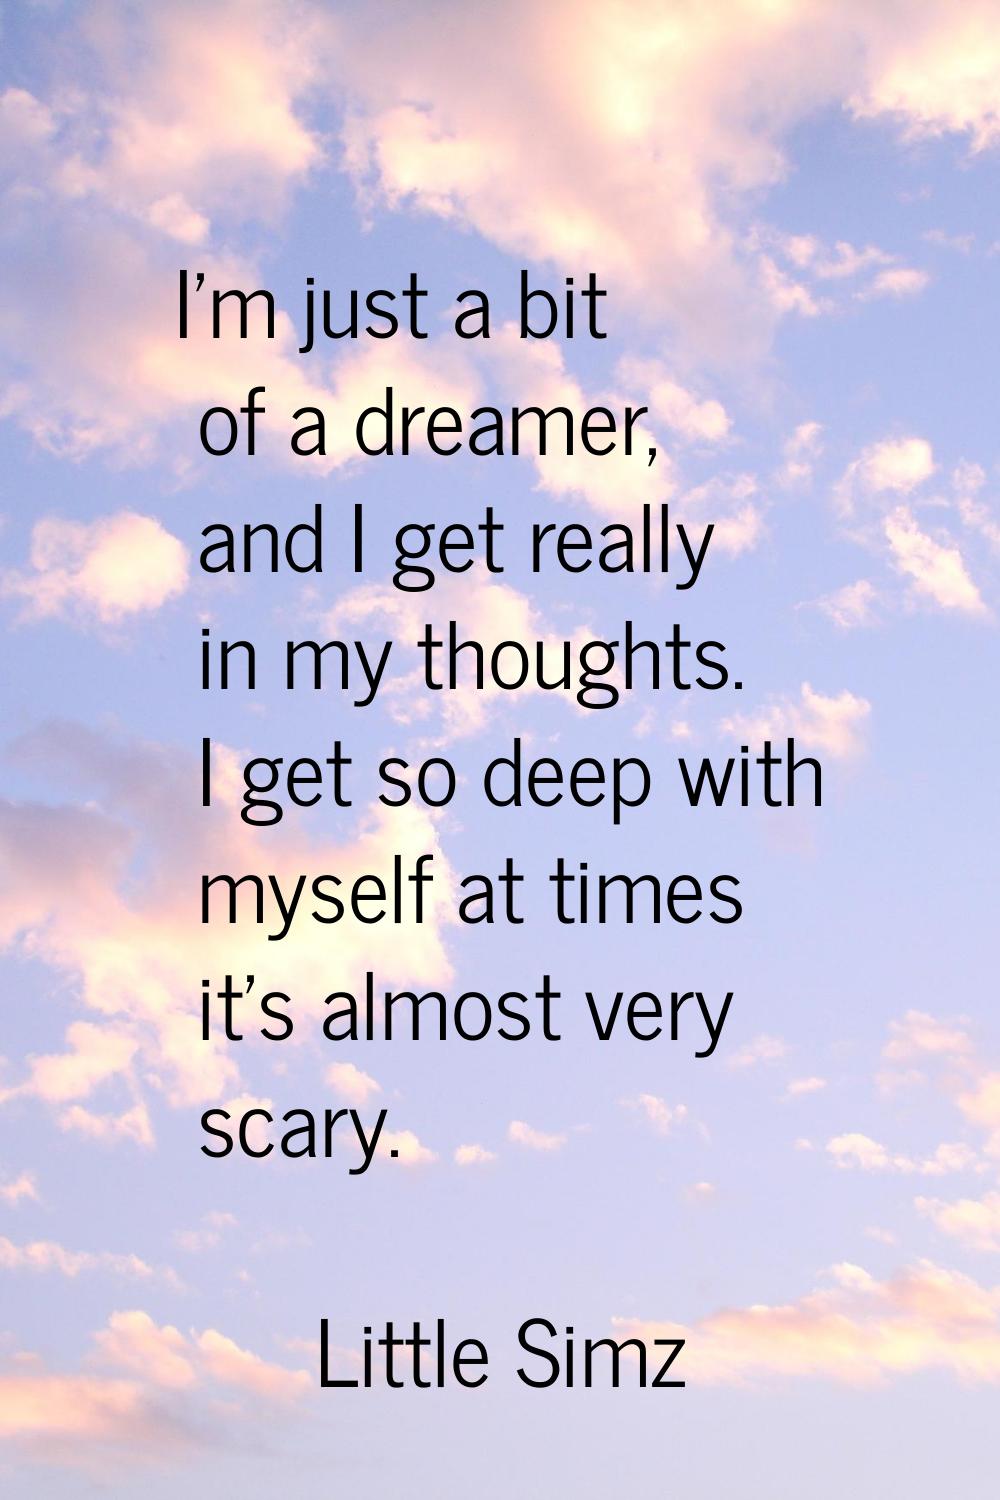 I'm just a bit of a dreamer, and I get really in my thoughts. I get so deep with myself at times it